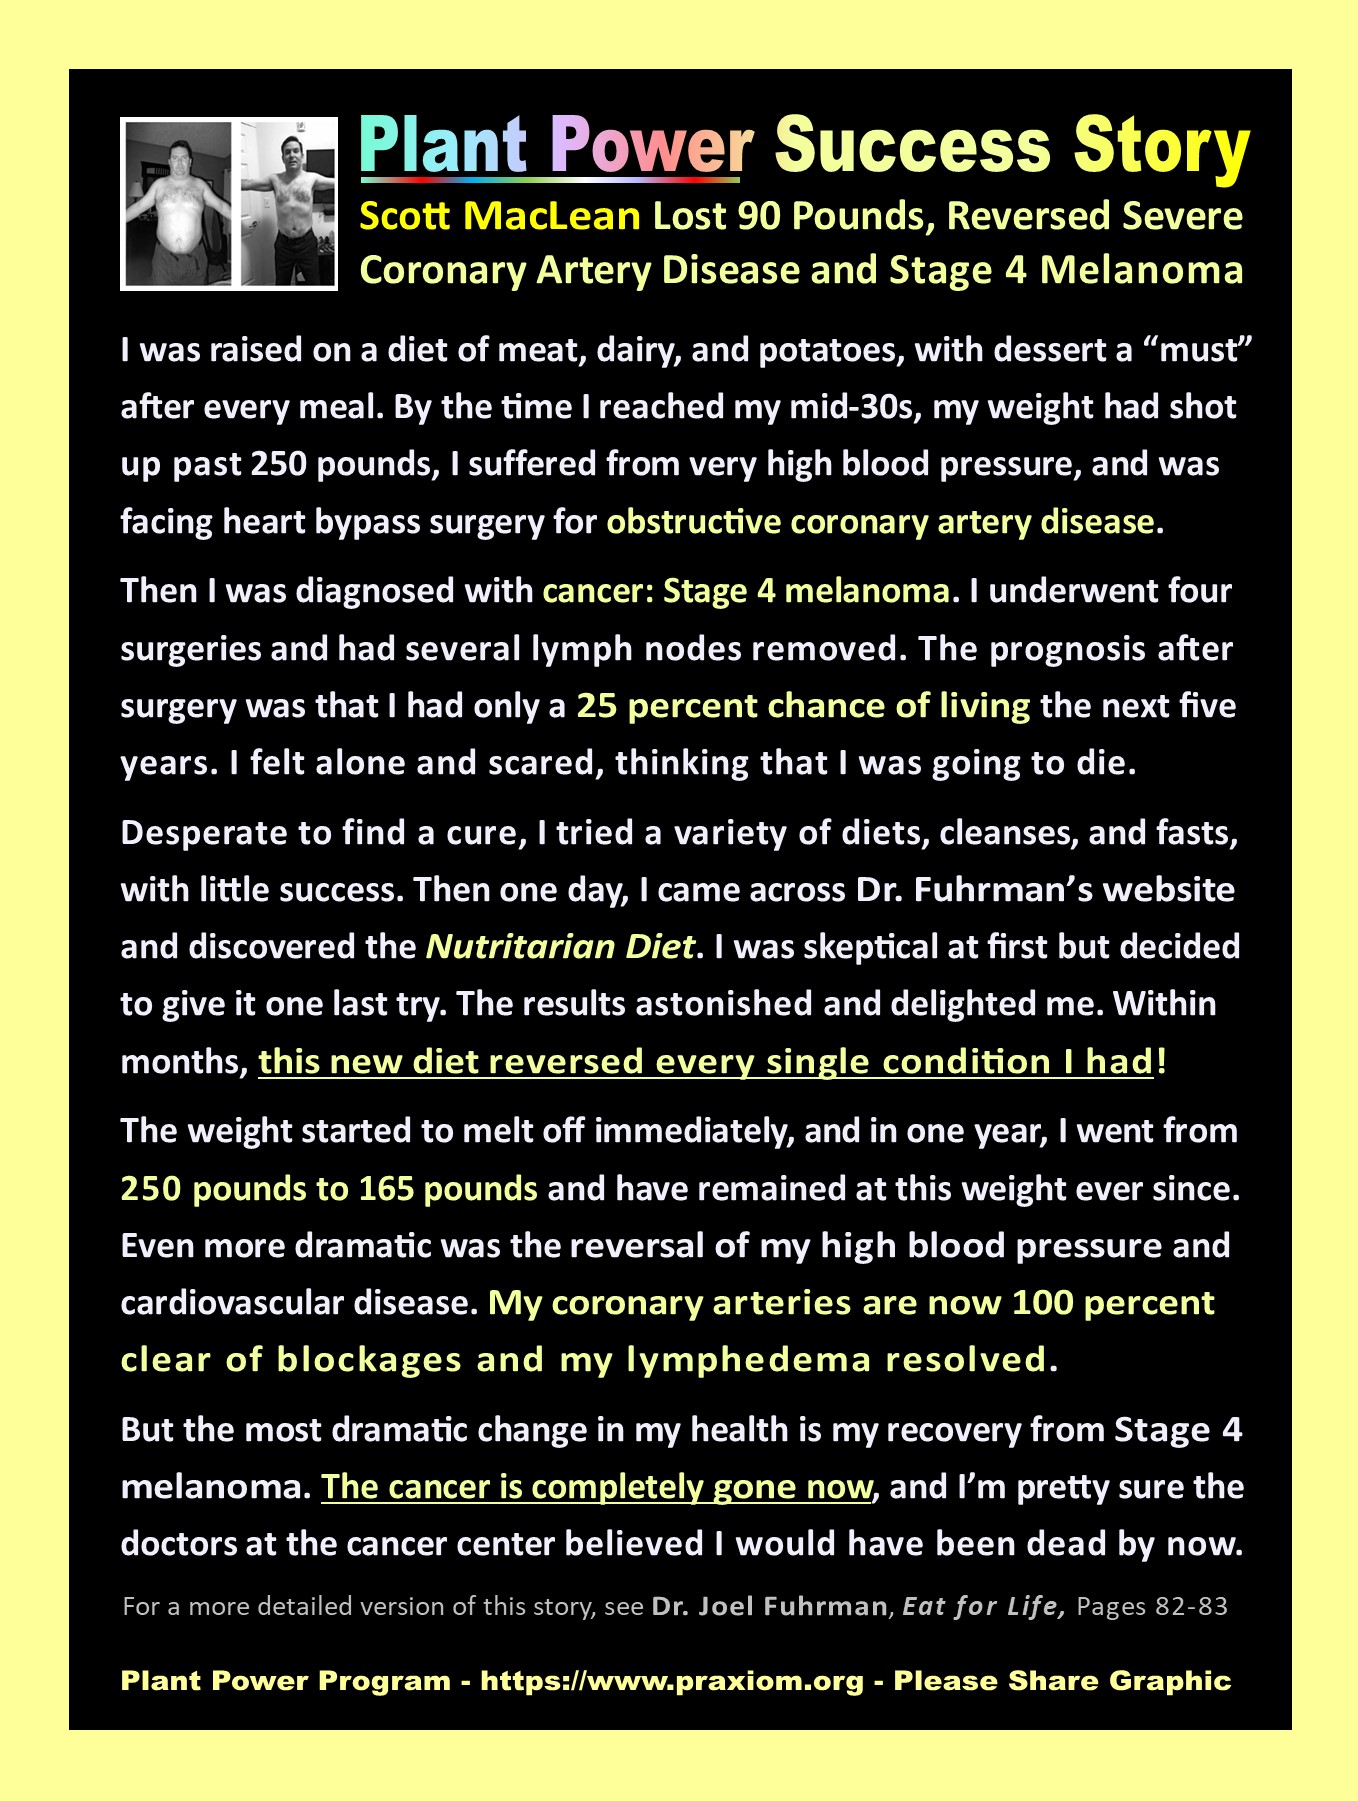 Scott MacLean lost 90 Pounds and Reversed Coronary Artery Disease and Stage 4 Melanoma